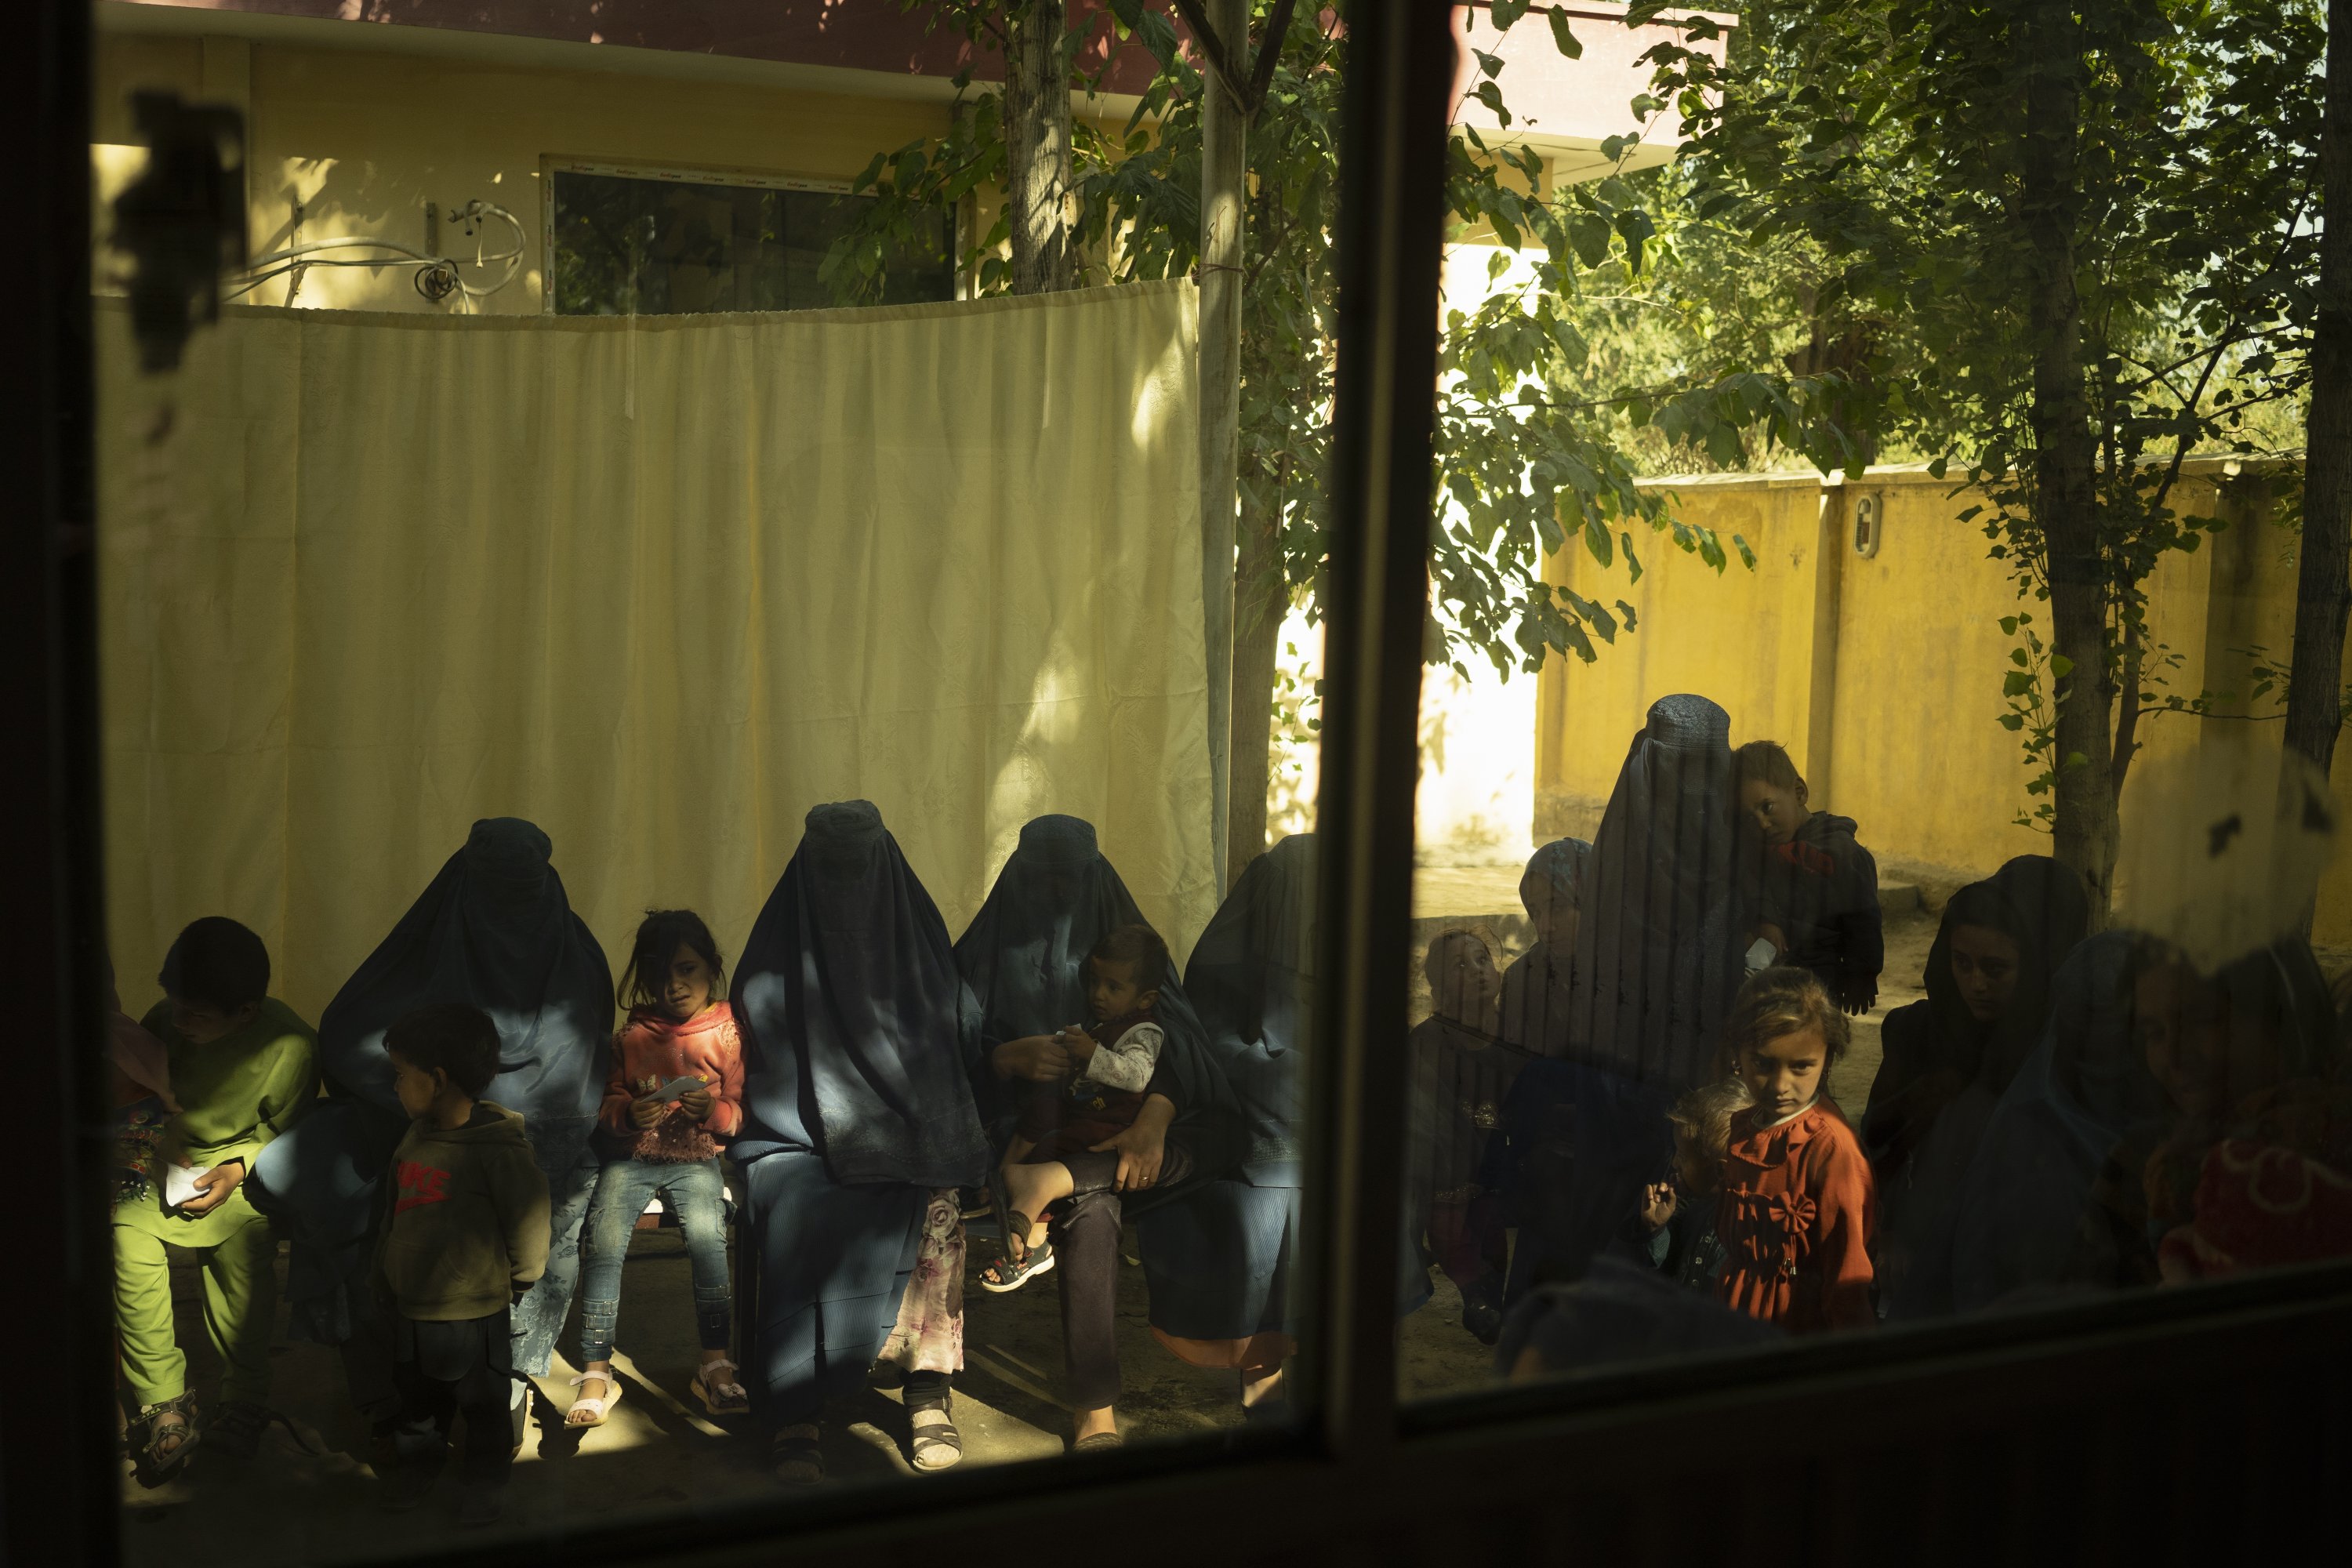 Patients are seen waiting through the window of a doctor